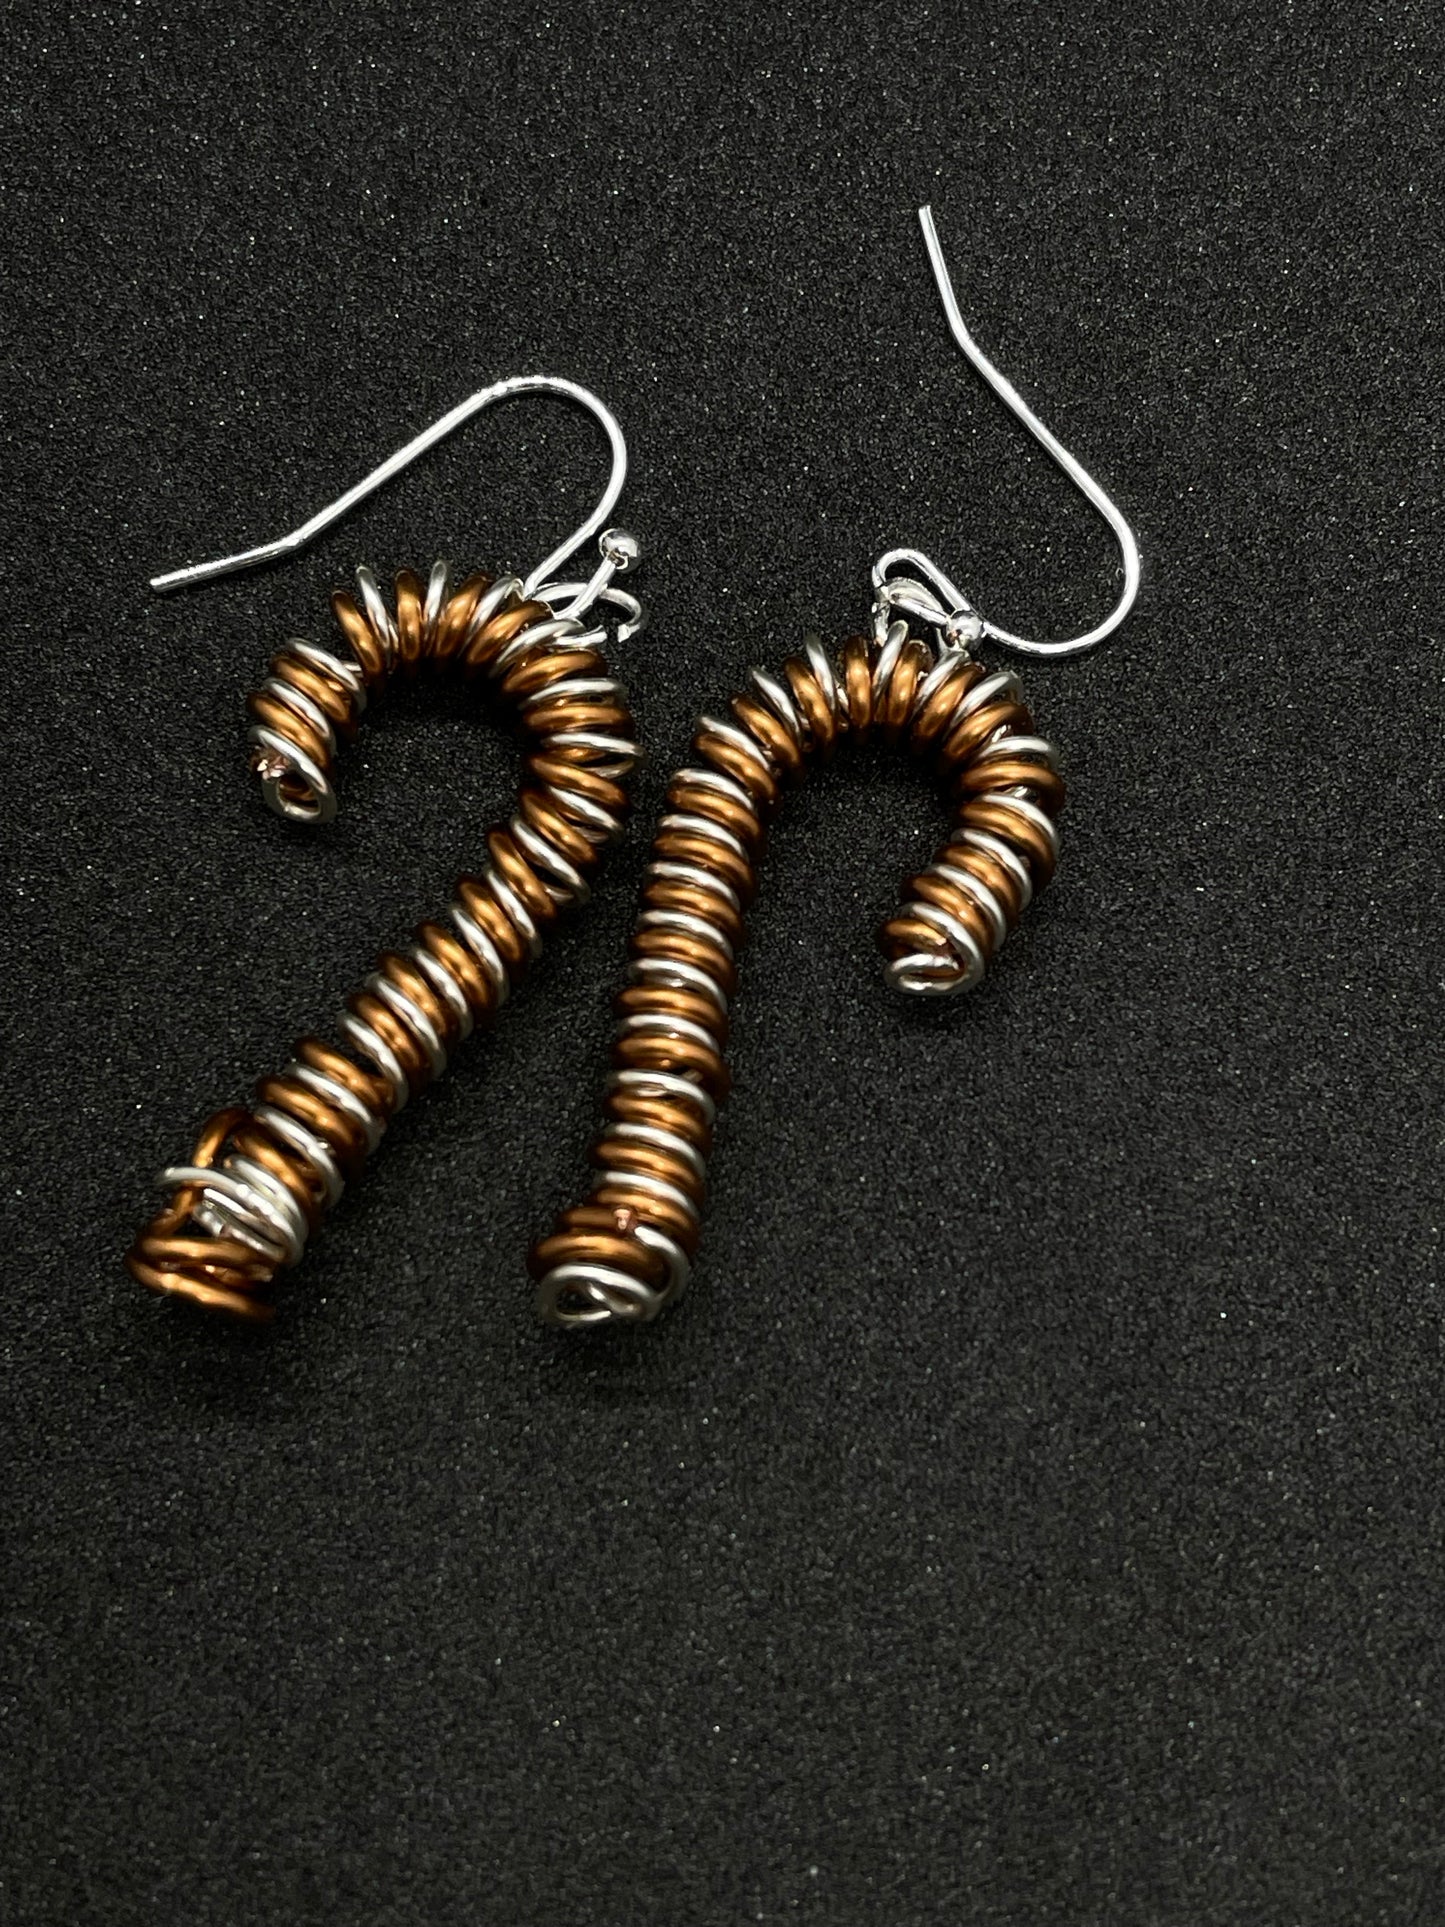 Twisted wire candy cane Christmas earrings